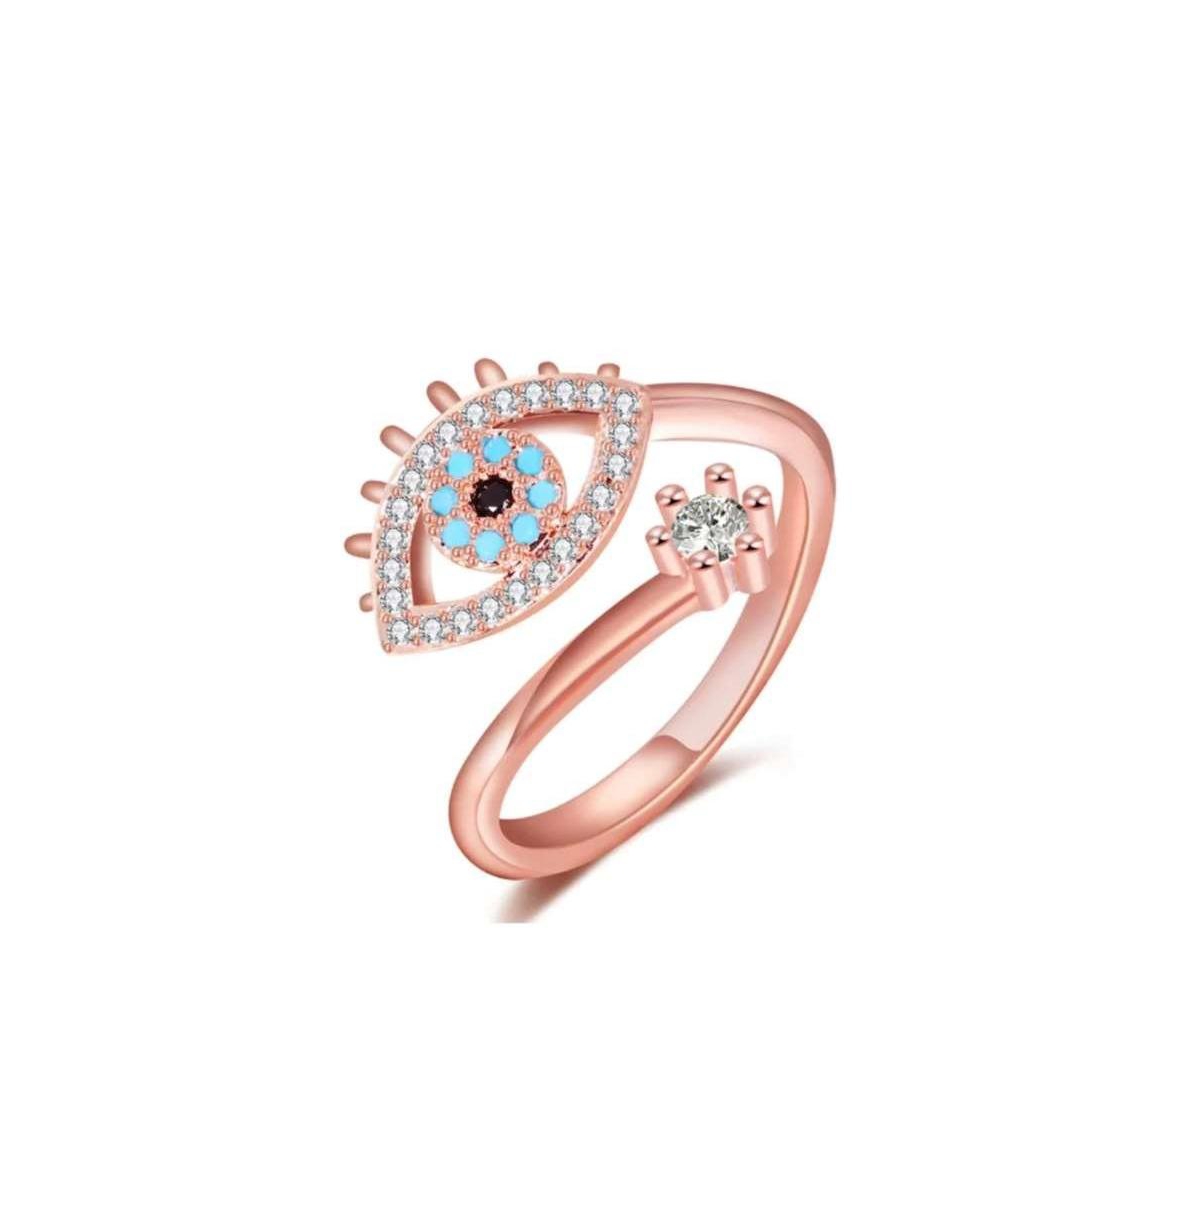 Evil Eye Rings Adjustable with Cubic Zirconia - Rose Gold